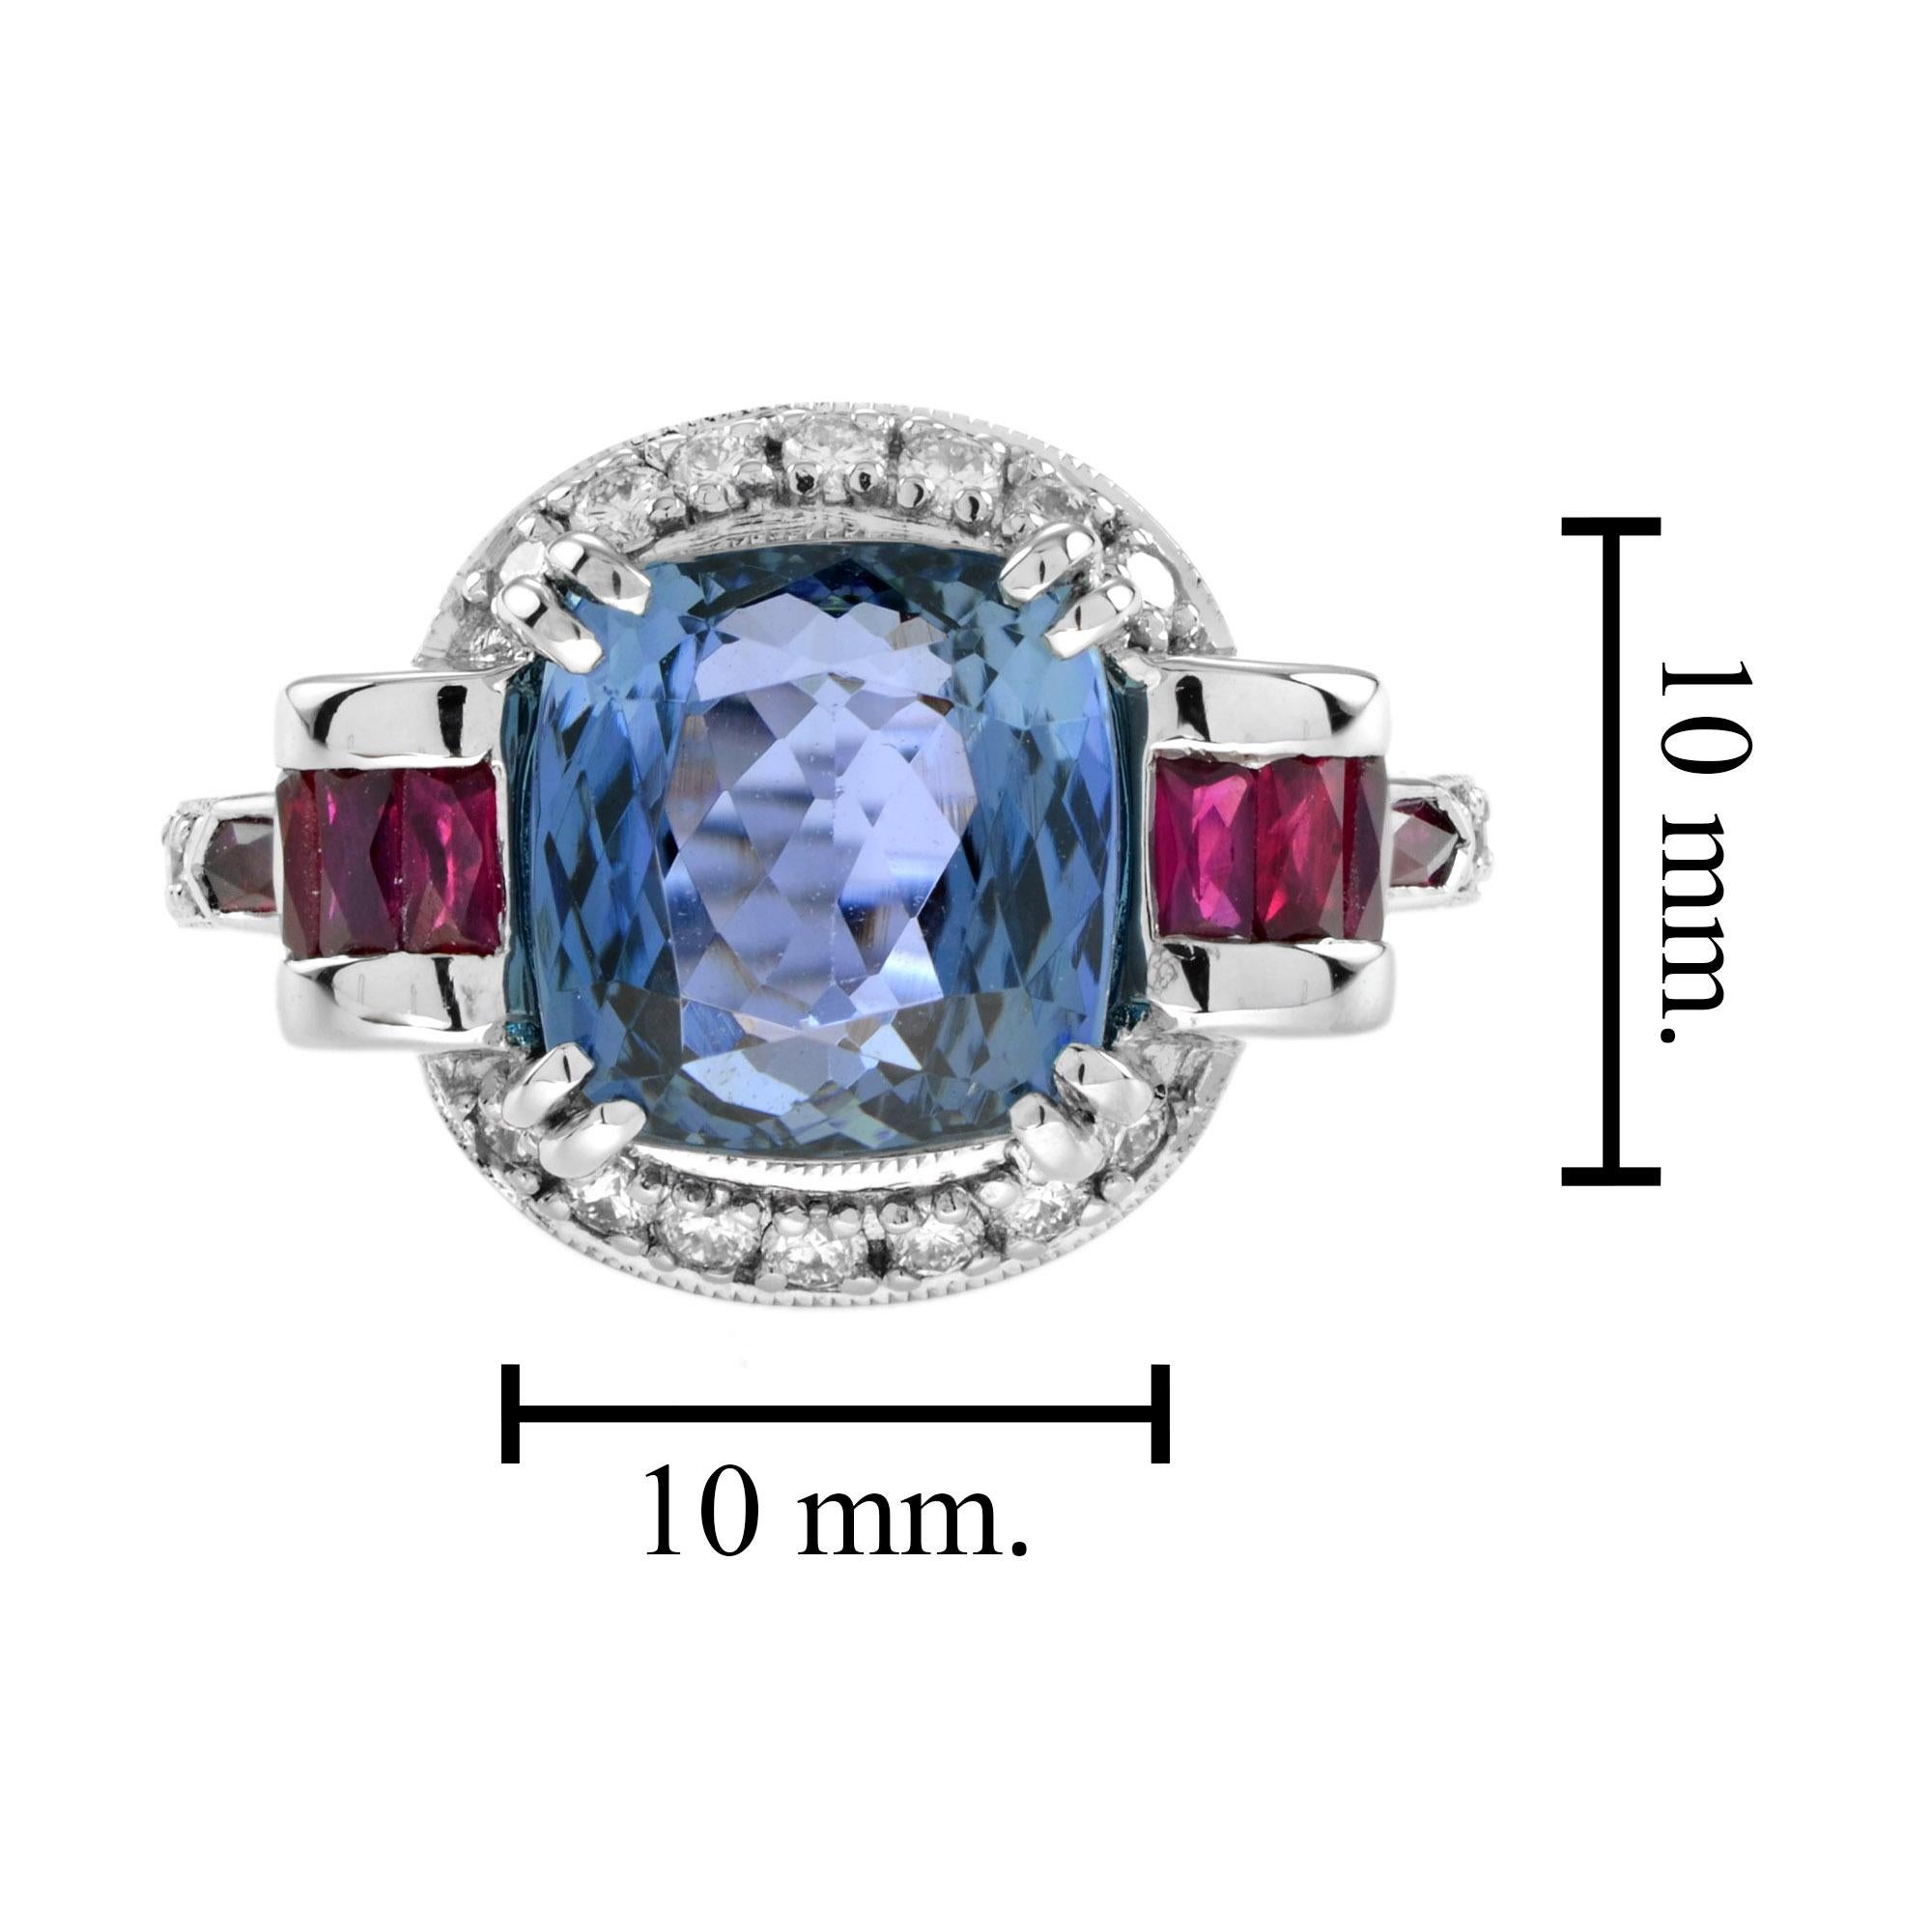 Cushion Cut Certified Tanzanite with Diamond and Ruby Art Deco Style Ring in 18K White Gold